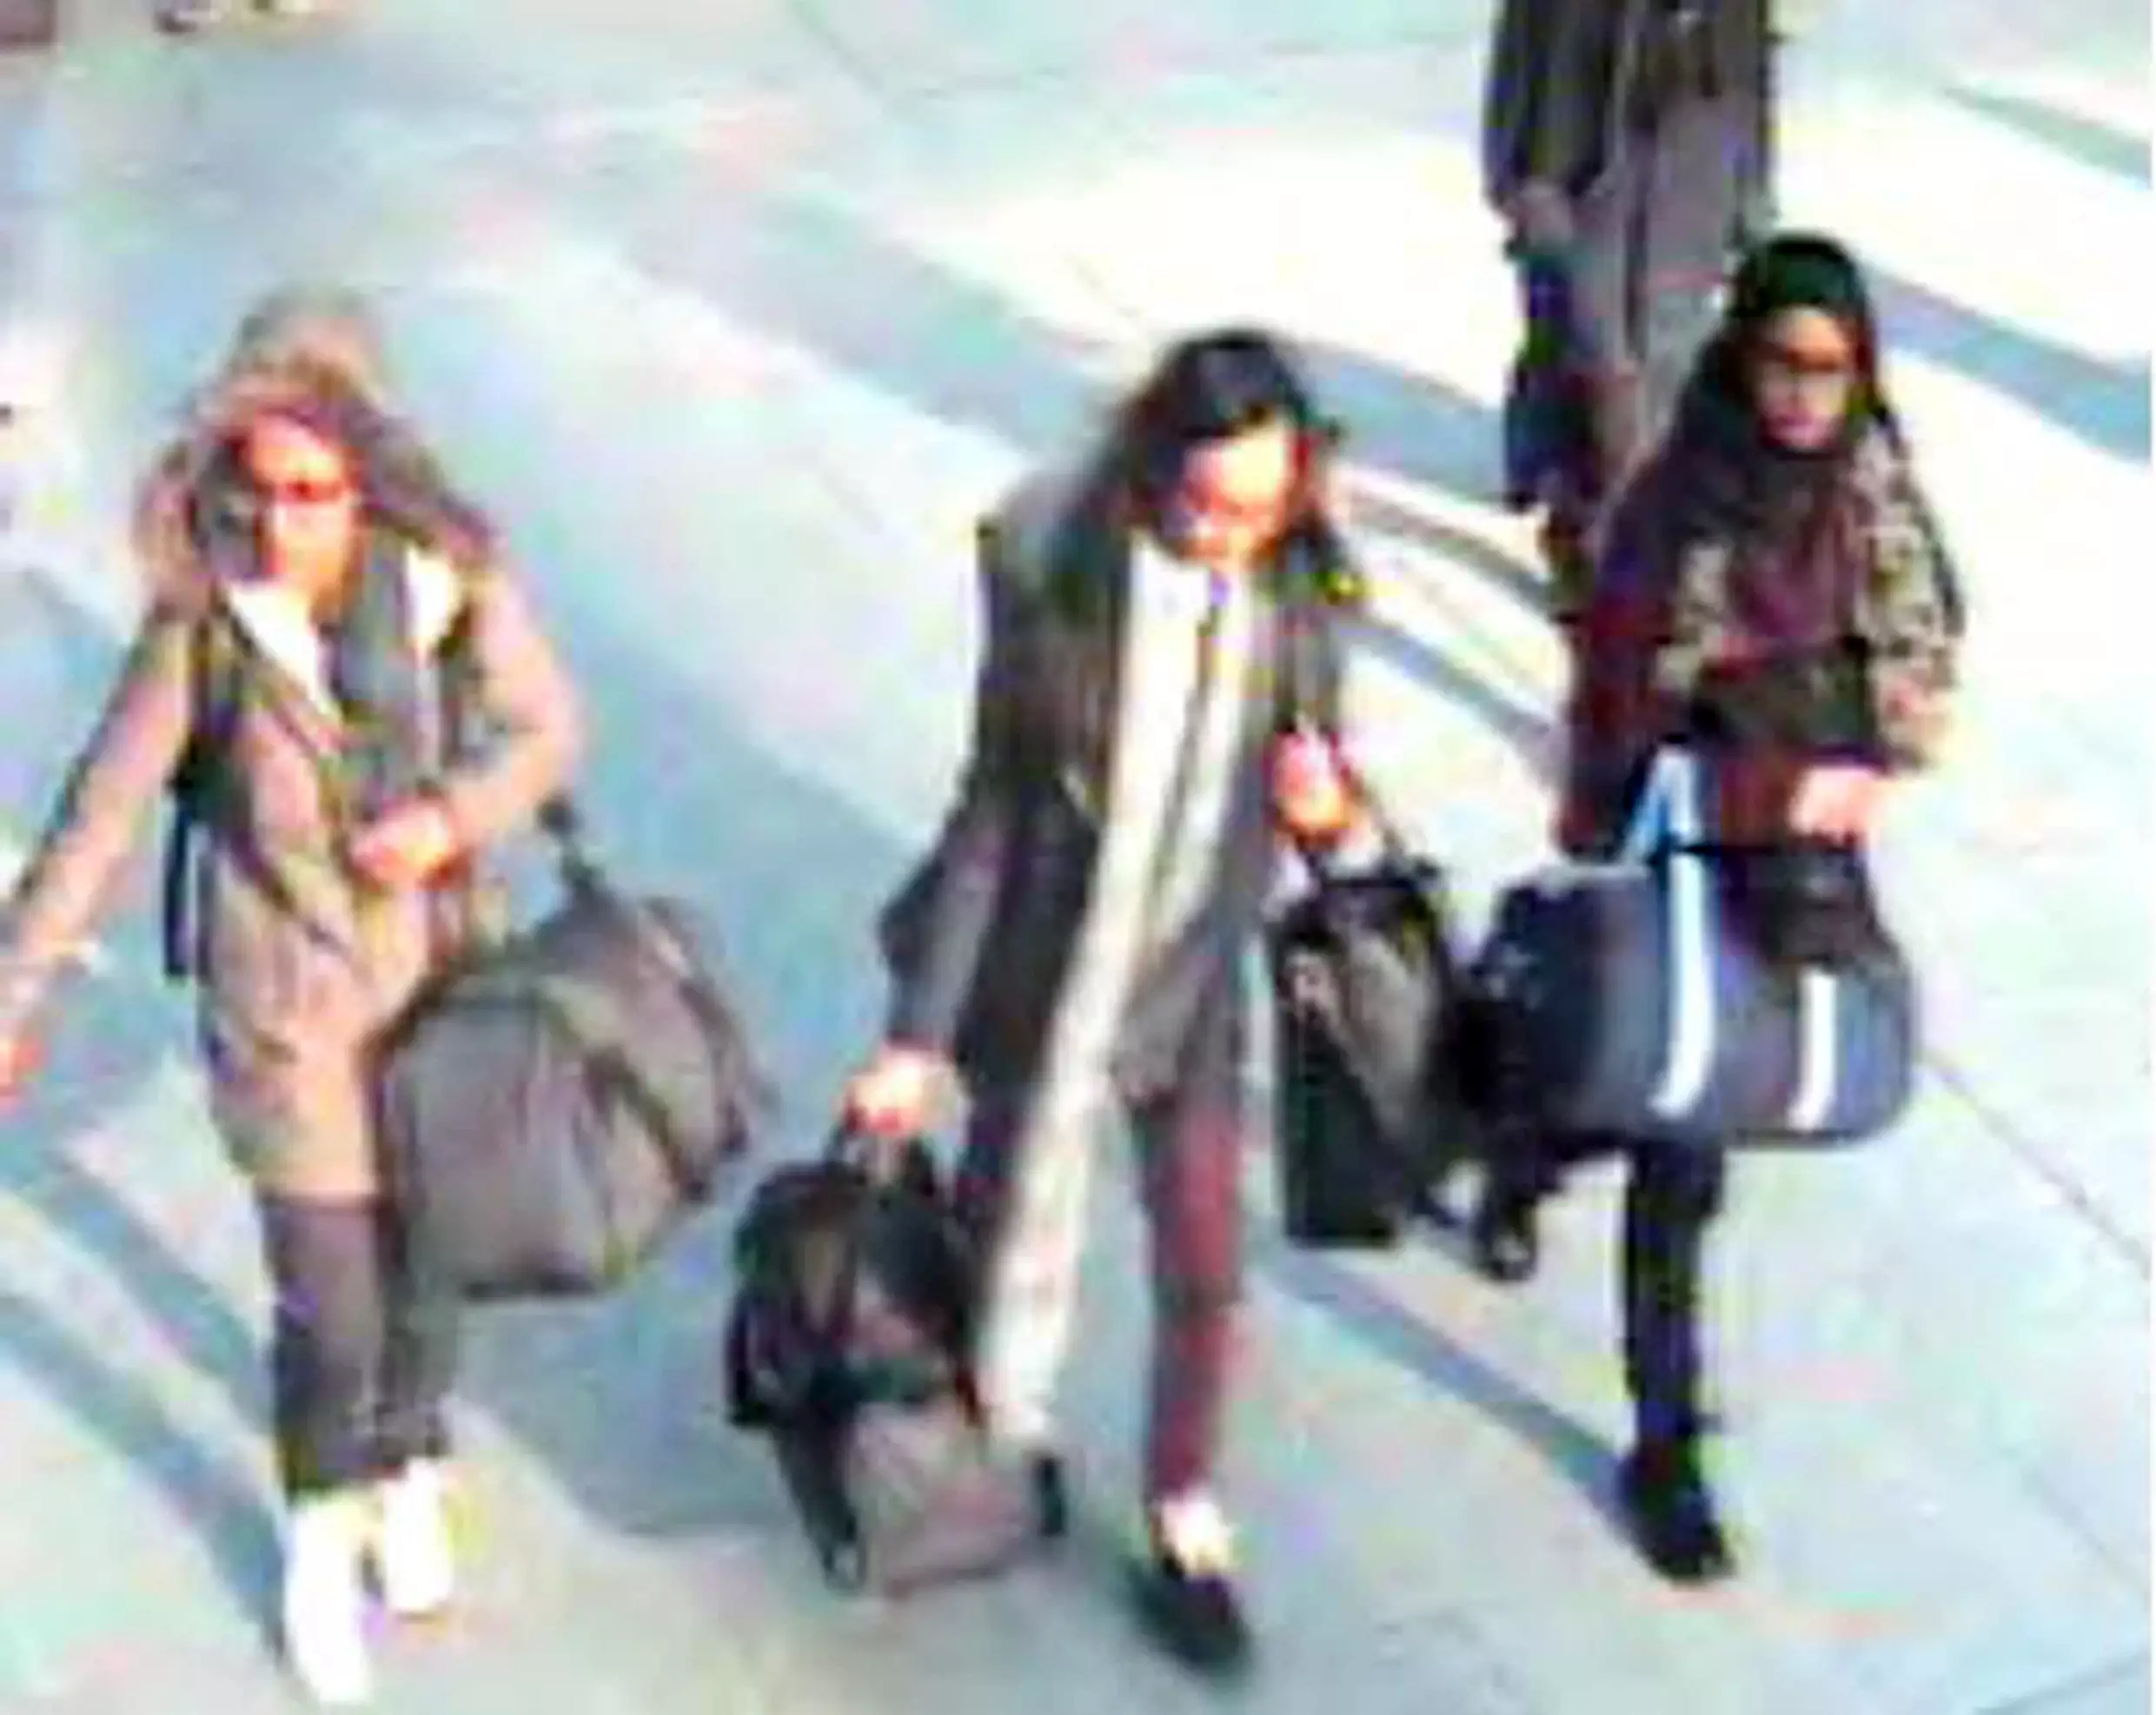 Begum, right, at Gatwick airport in February 2015.